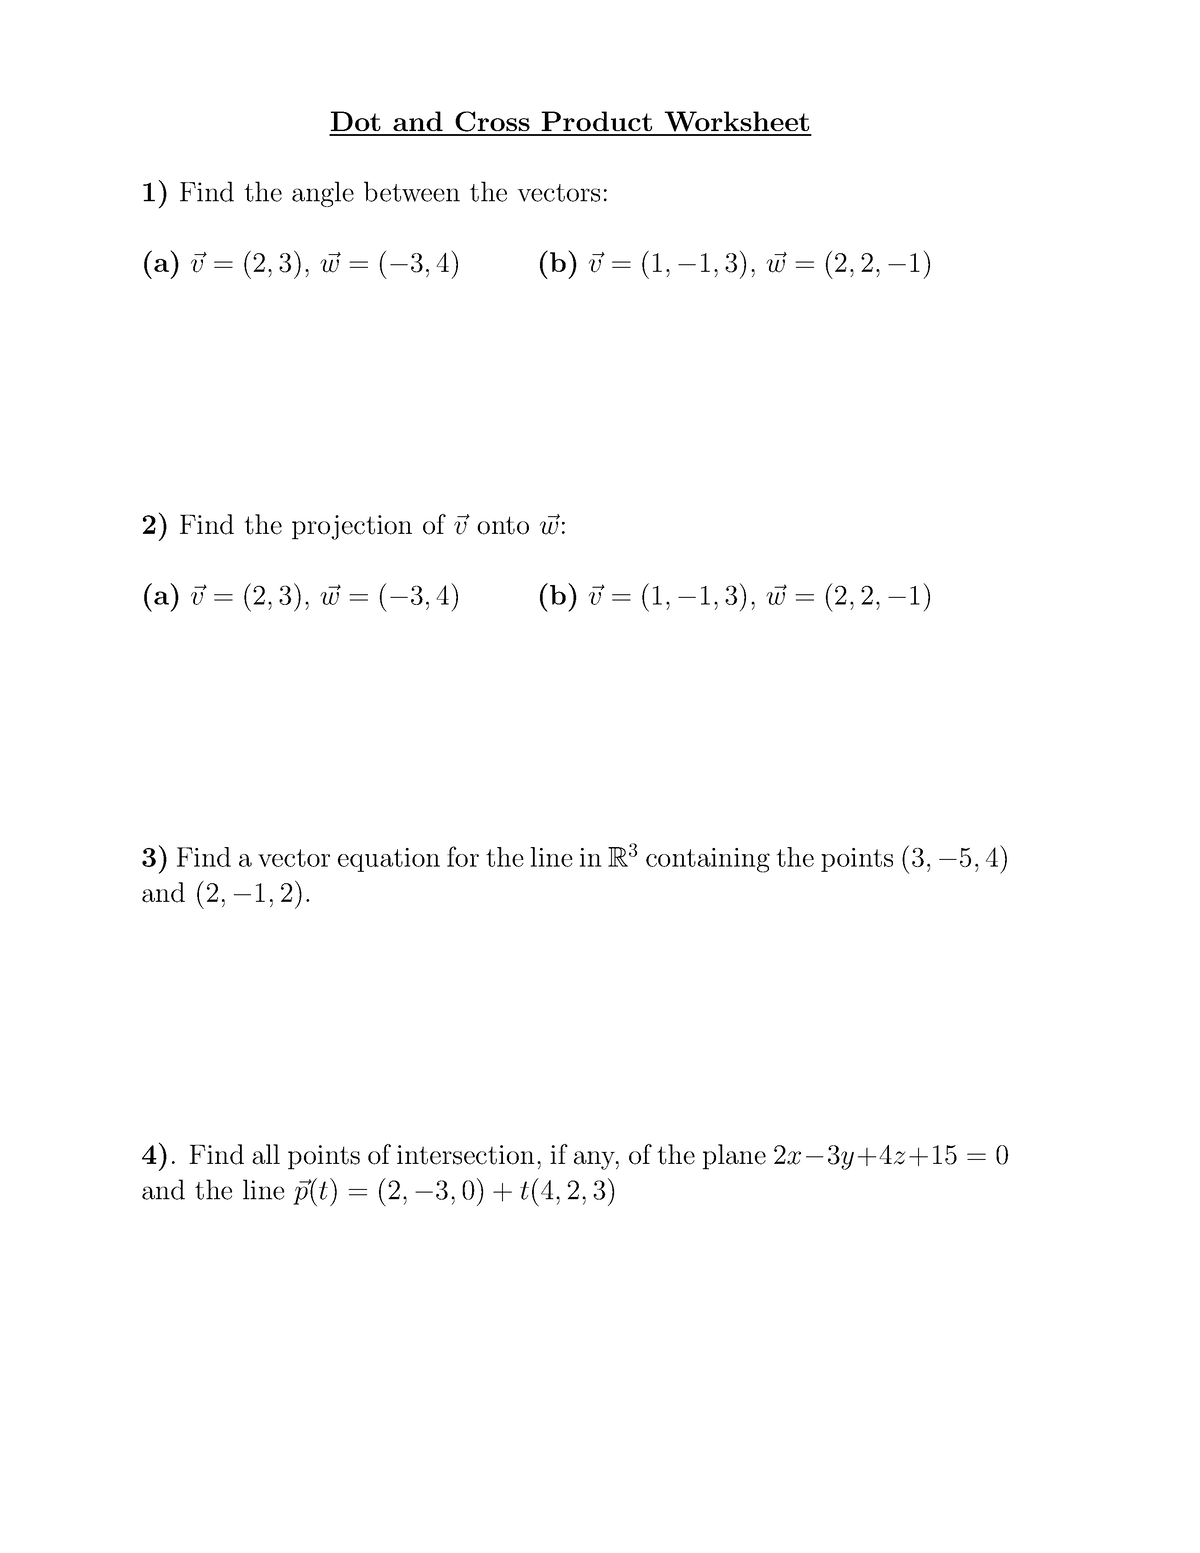 dot-and-cross-product-worksheet-4-find-all-points-of-intersection